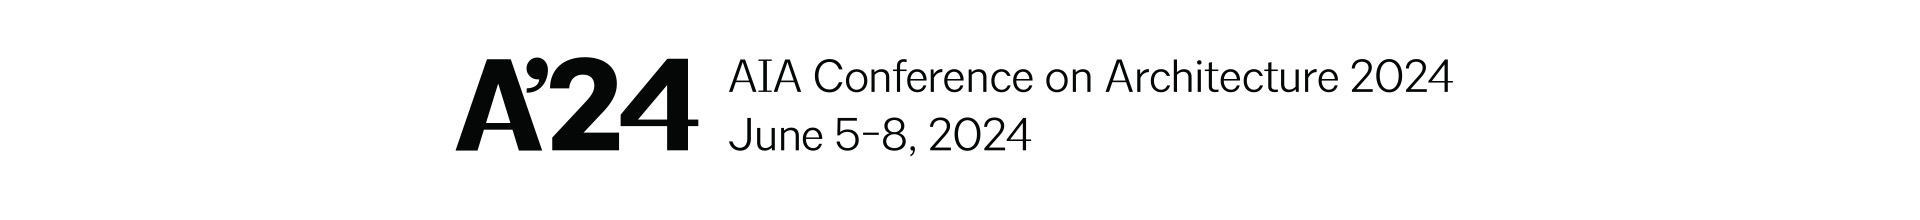 AIA Conference on Architecture 2024 Event Banner